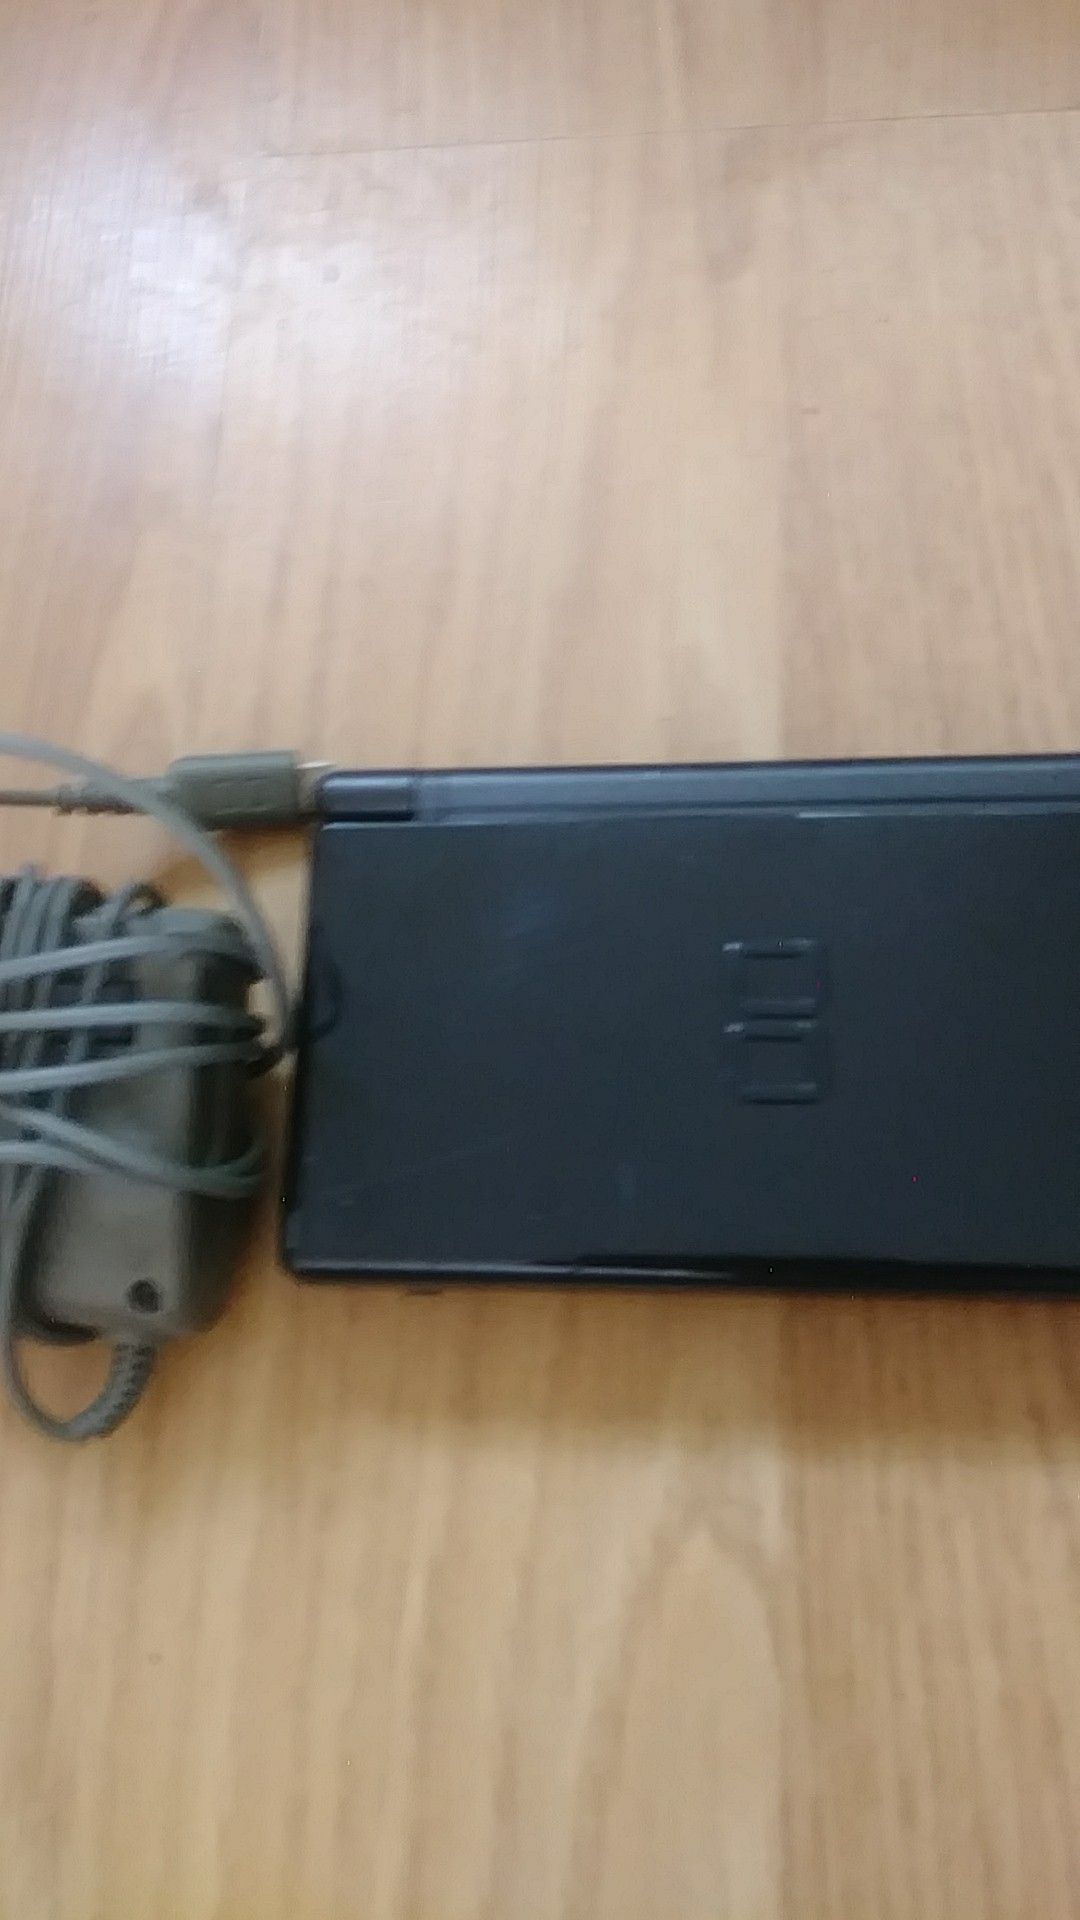 Nintendo DS Lite (Used) With charger